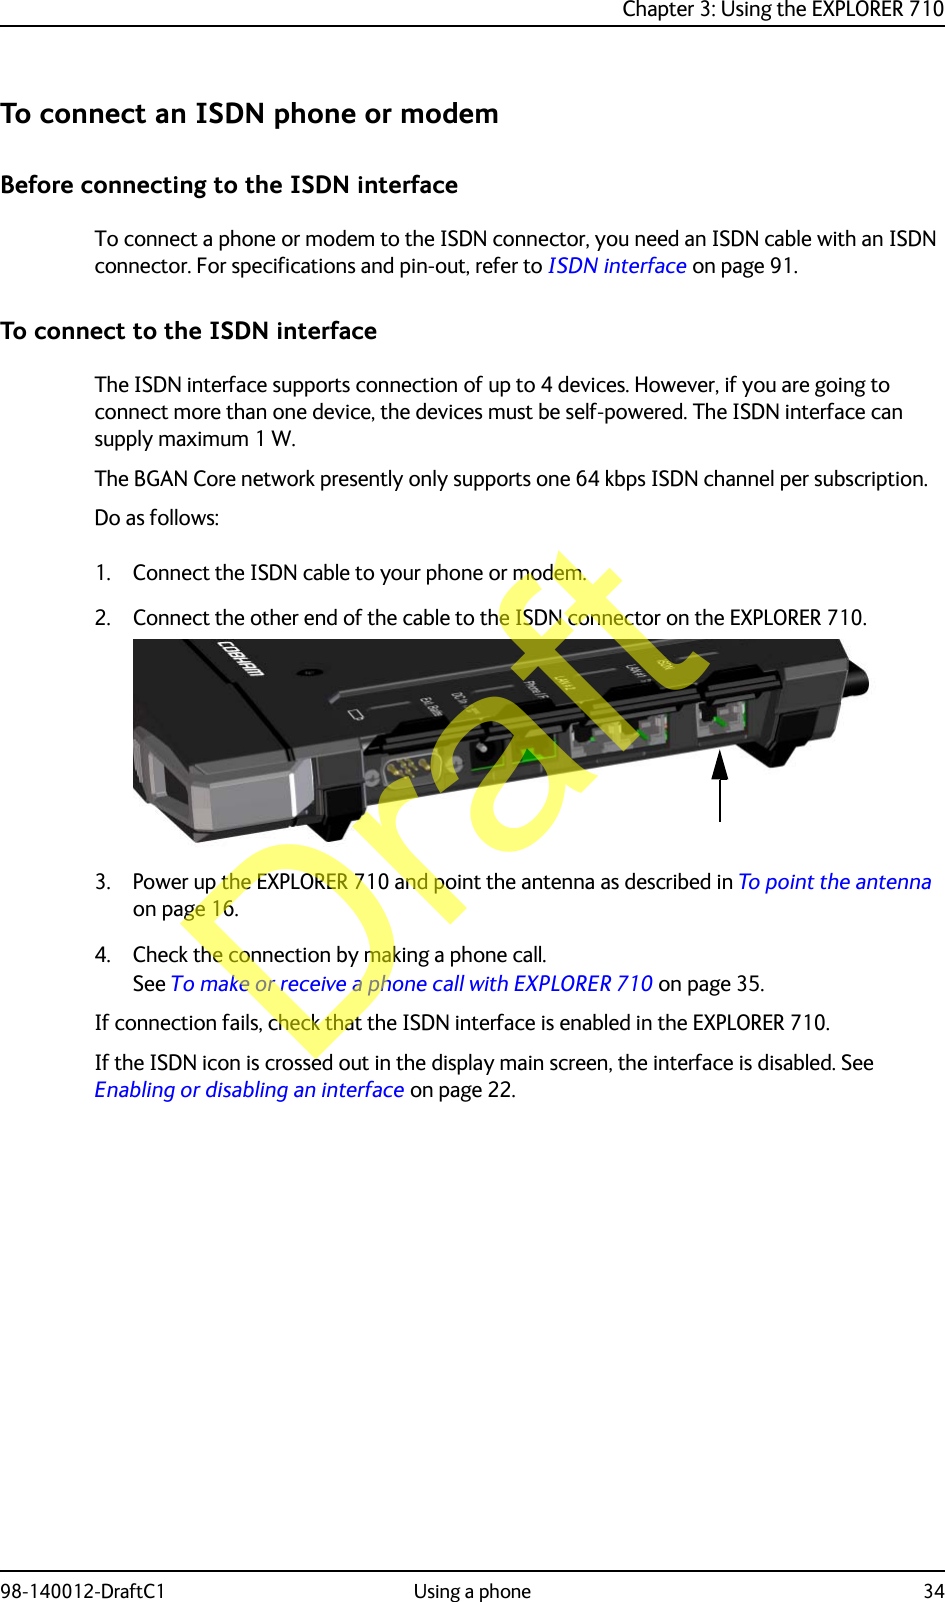 Chapter 3: Using the EXPLORER 71098-140012-DraftC1 Using a phone 34To connect an ISDN phone or modemBefore connecting to the ISDN interfaceTo connect a phone or modem to the ISDN connector, you need an ISDN cable with an ISDN connector. For specifications and pin-out, refer to ISDN interface on page 91.To connect to the ISDN interfaceThe ISDN interface supports connection of up to 4 devices. However, if you are going to connect more than one device, the devices must be self-powered. The ISDN interface can supply maximum 1 W.The BGAN Core network presently only supports one 64 kbps ISDN channel per subscription.Do as follows:1. Connect the ISDN cable to your phone or modem.2. Connect the other end of the cable to the ISDN connector on the EXPLORER 710.3. Power up the EXPLORER 710 and point the antenna as described in To point the antenna on page 16. 4. Check the connection by making a phone call. See To make or receive a phone call with EXPLORER 710 on page 35.If connection fails, check that the ISDN interface is enabled in the EXPLORER 710.If the ISDN icon is crossed out in the display main screen, the interface is disabled. See Enabling or disabling an interface on page 22.Draft